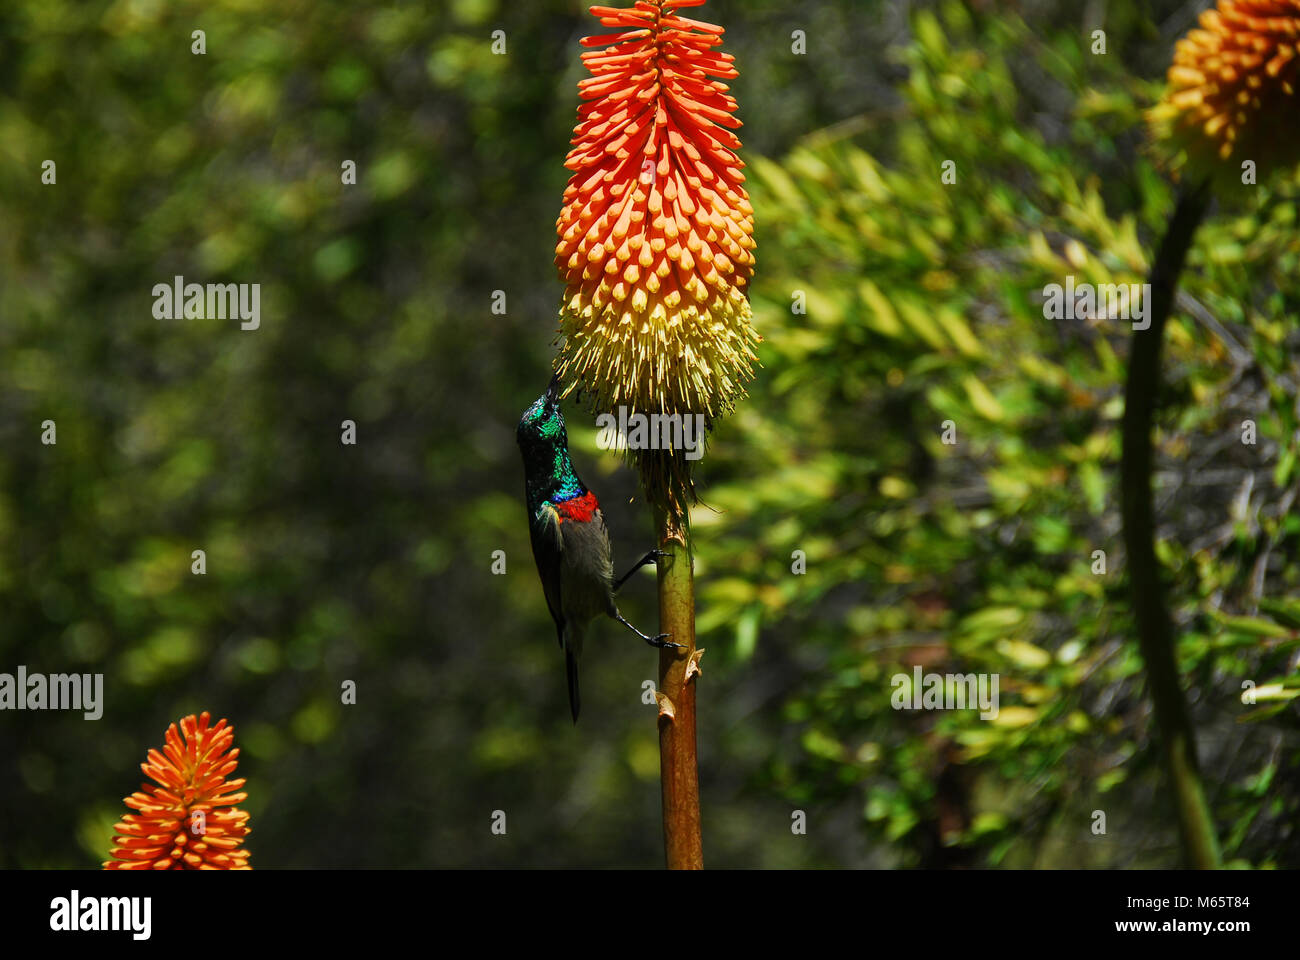 Close up of a beautiful double collared Sunbird (Cinnyris pulchellus) feeding on a Red Hot Poker (Tritoma) flower's nectar, in South Africa. Stock Photo